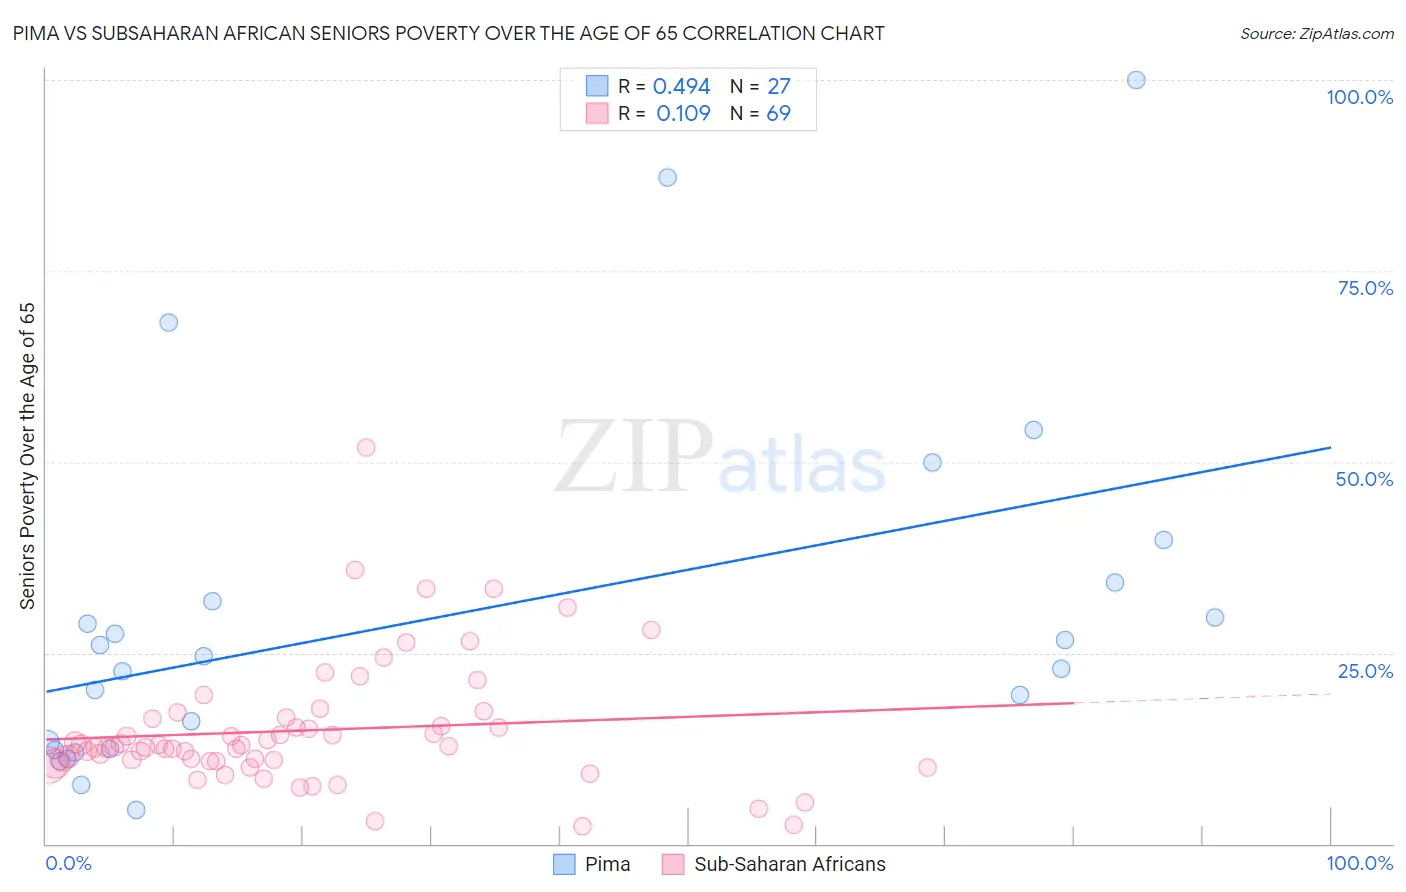 Pima vs Subsaharan African Seniors Poverty Over the Age of 65